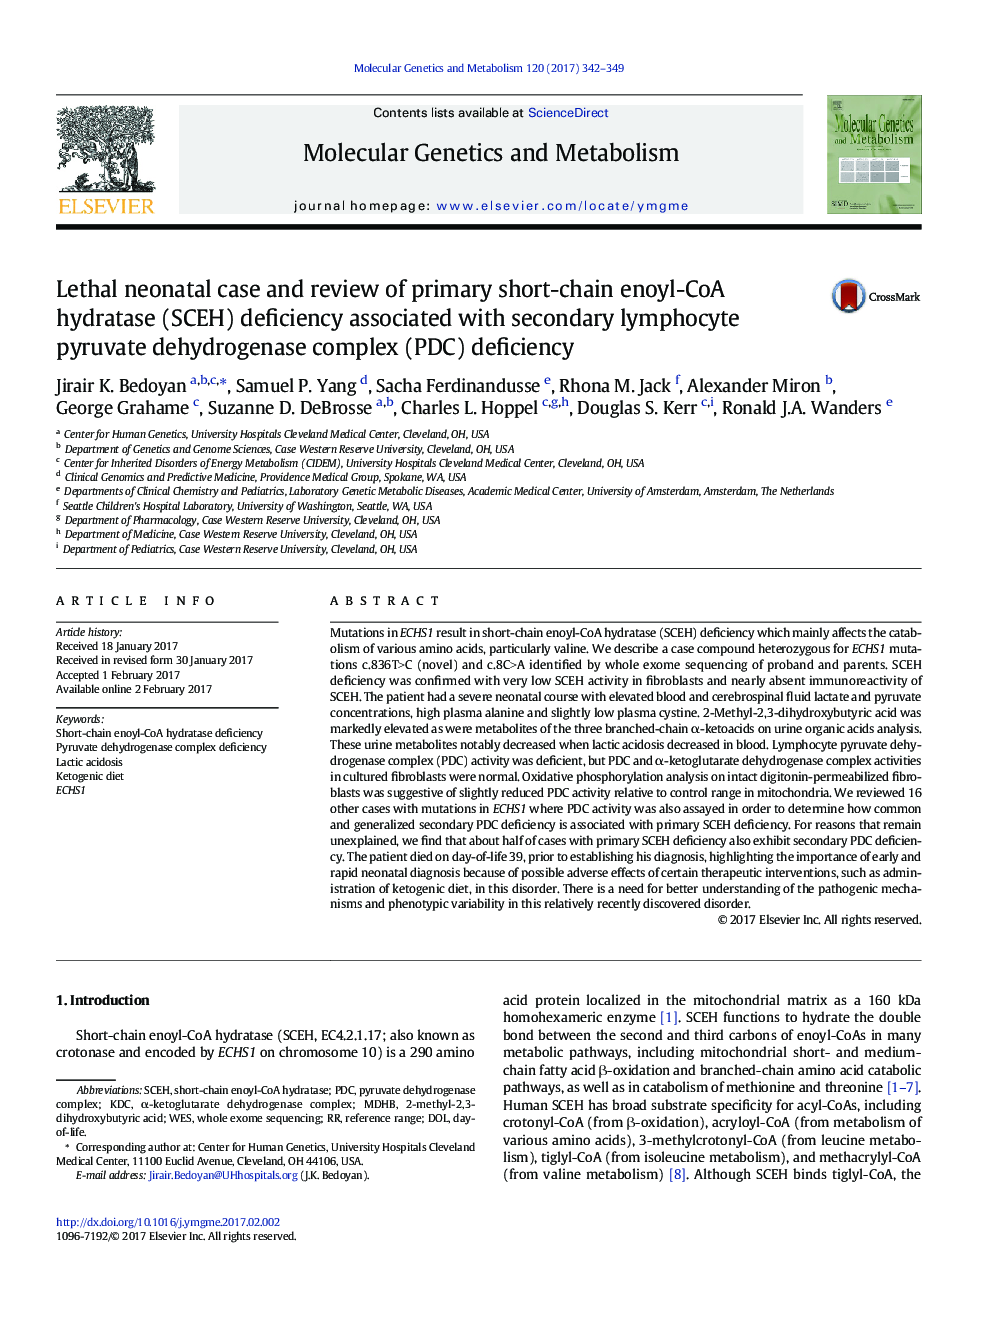 Lethal neonatal case and review of primary short-chain enoyl-CoA hydratase (SCEH) deficiency associated with secondary lymphocyte pyruvate dehydrogenase complex (PDC) deficiency